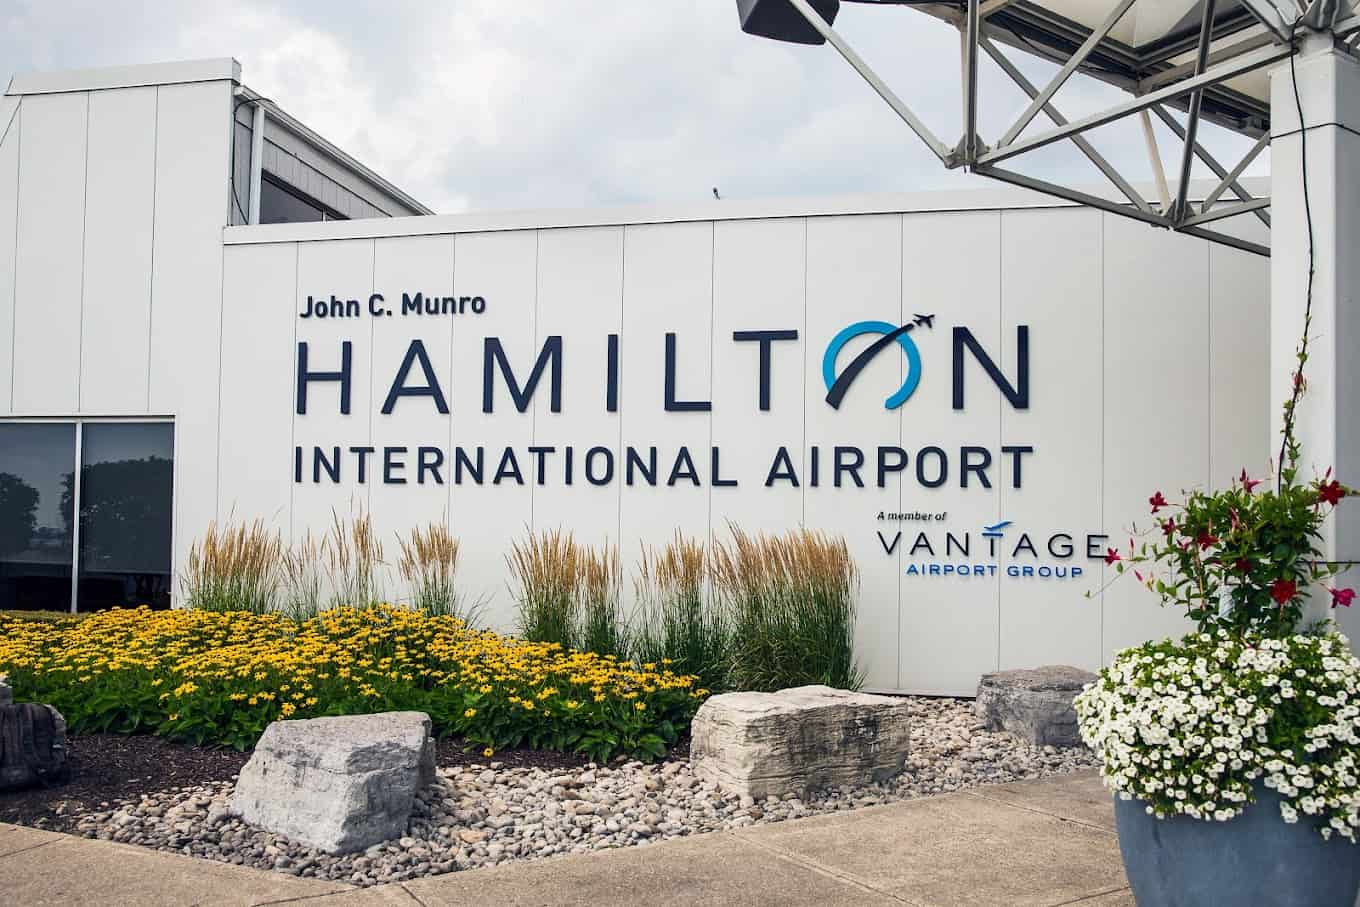 Hamilton airport will fly direct to Cuba, Mexico, Dominican Republic this winter